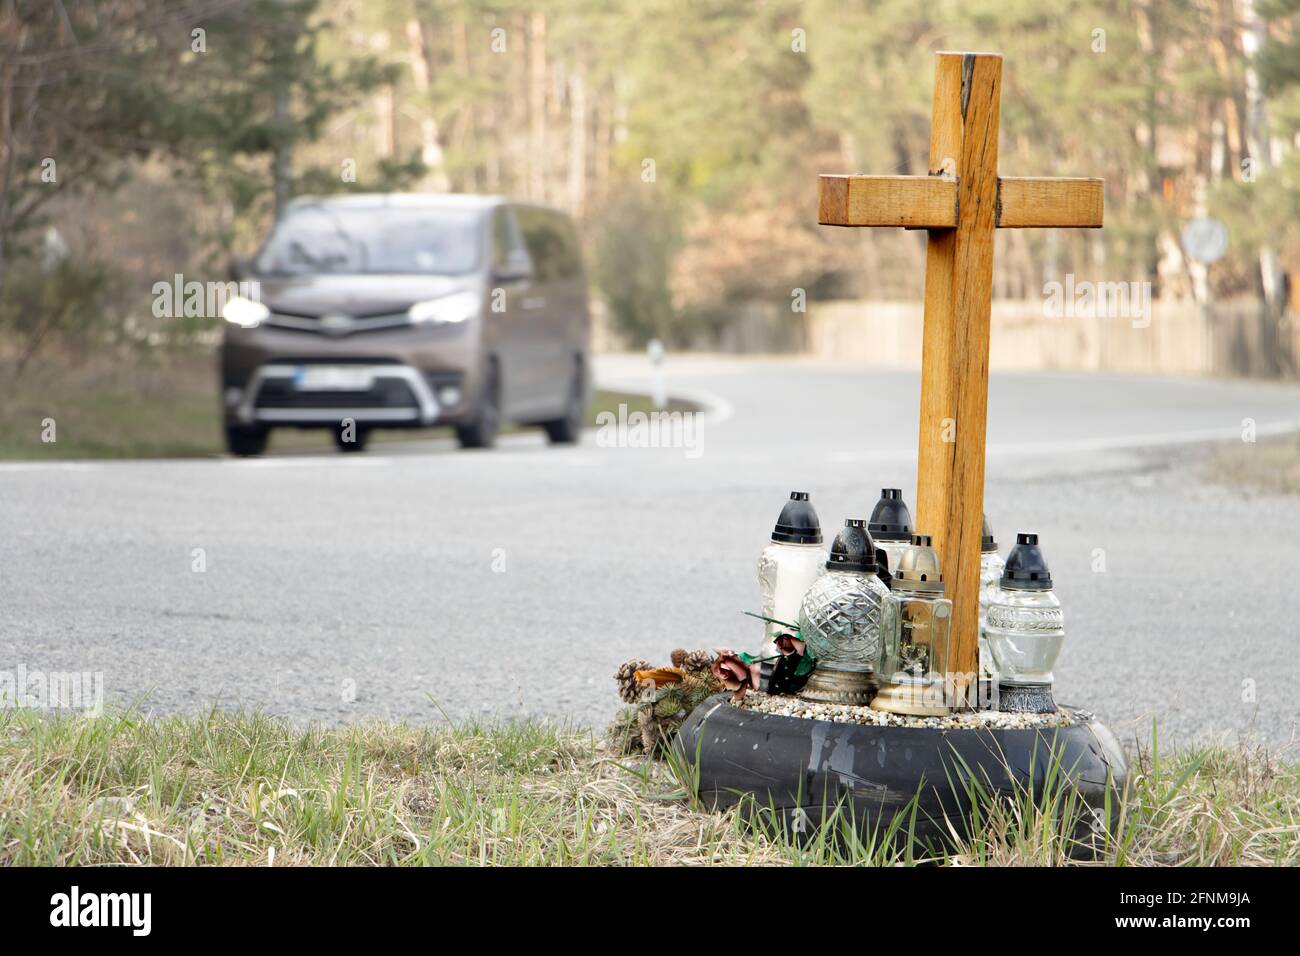 A roadside memorial cross with a candles commemorating the tragic death, on a background ride blurred car. Stock Photo